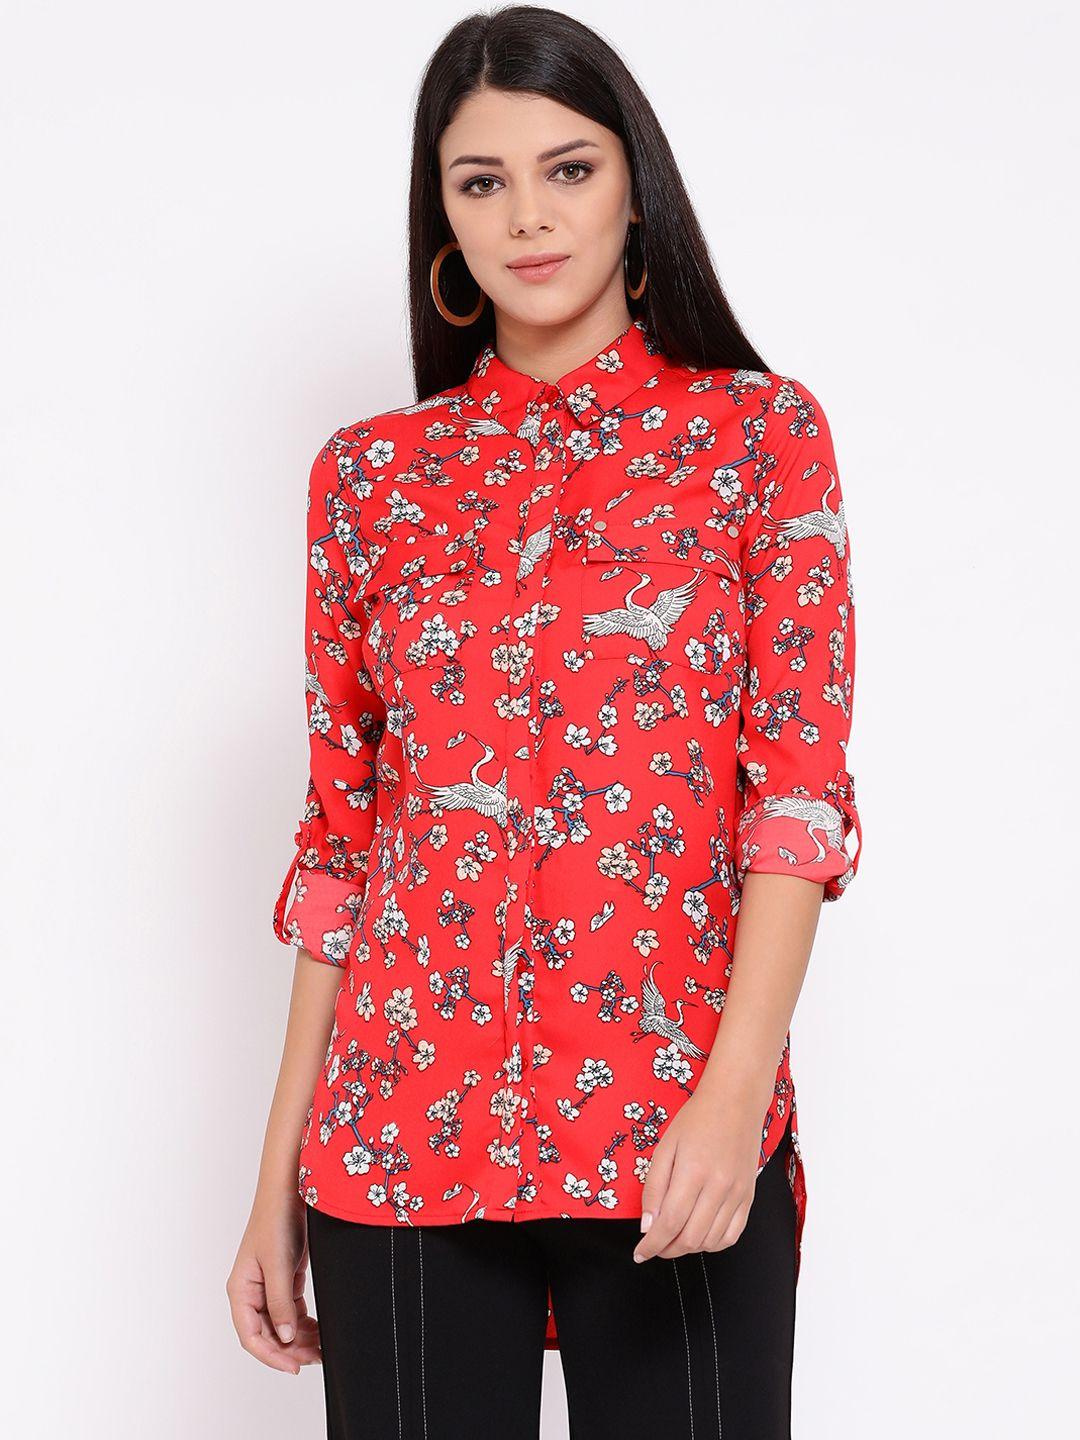 oxolloxo-women-red-&-white-regular-fit-floral-printed-casual-shirt